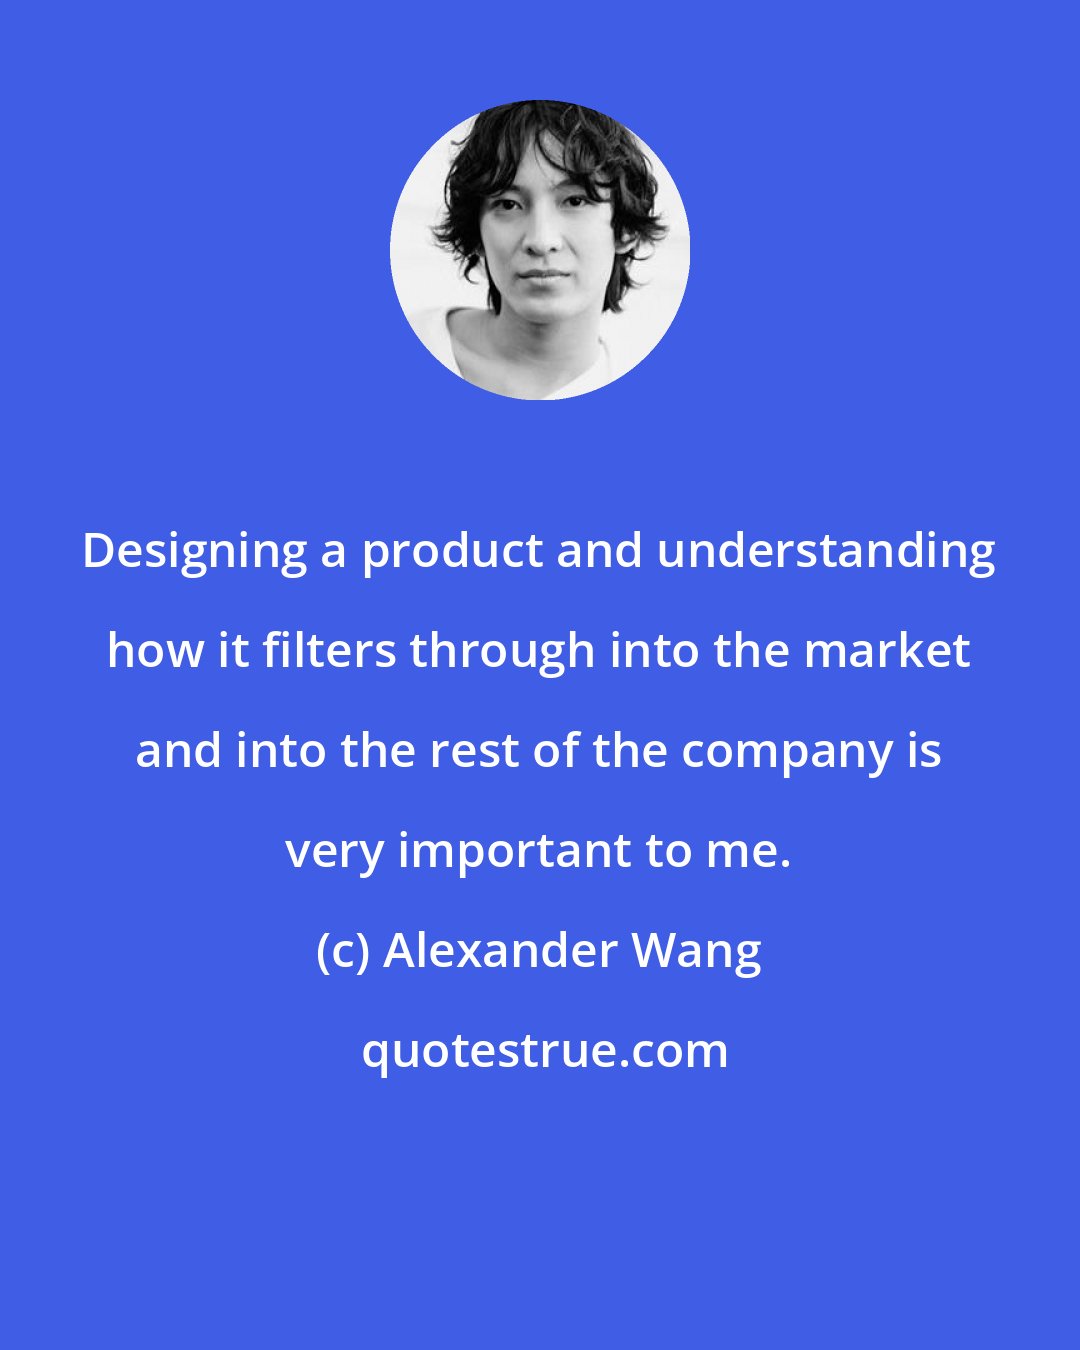 Alexander Wang: Designing a product and understanding how it filters through into the market and into the rest of the company is very important to me.